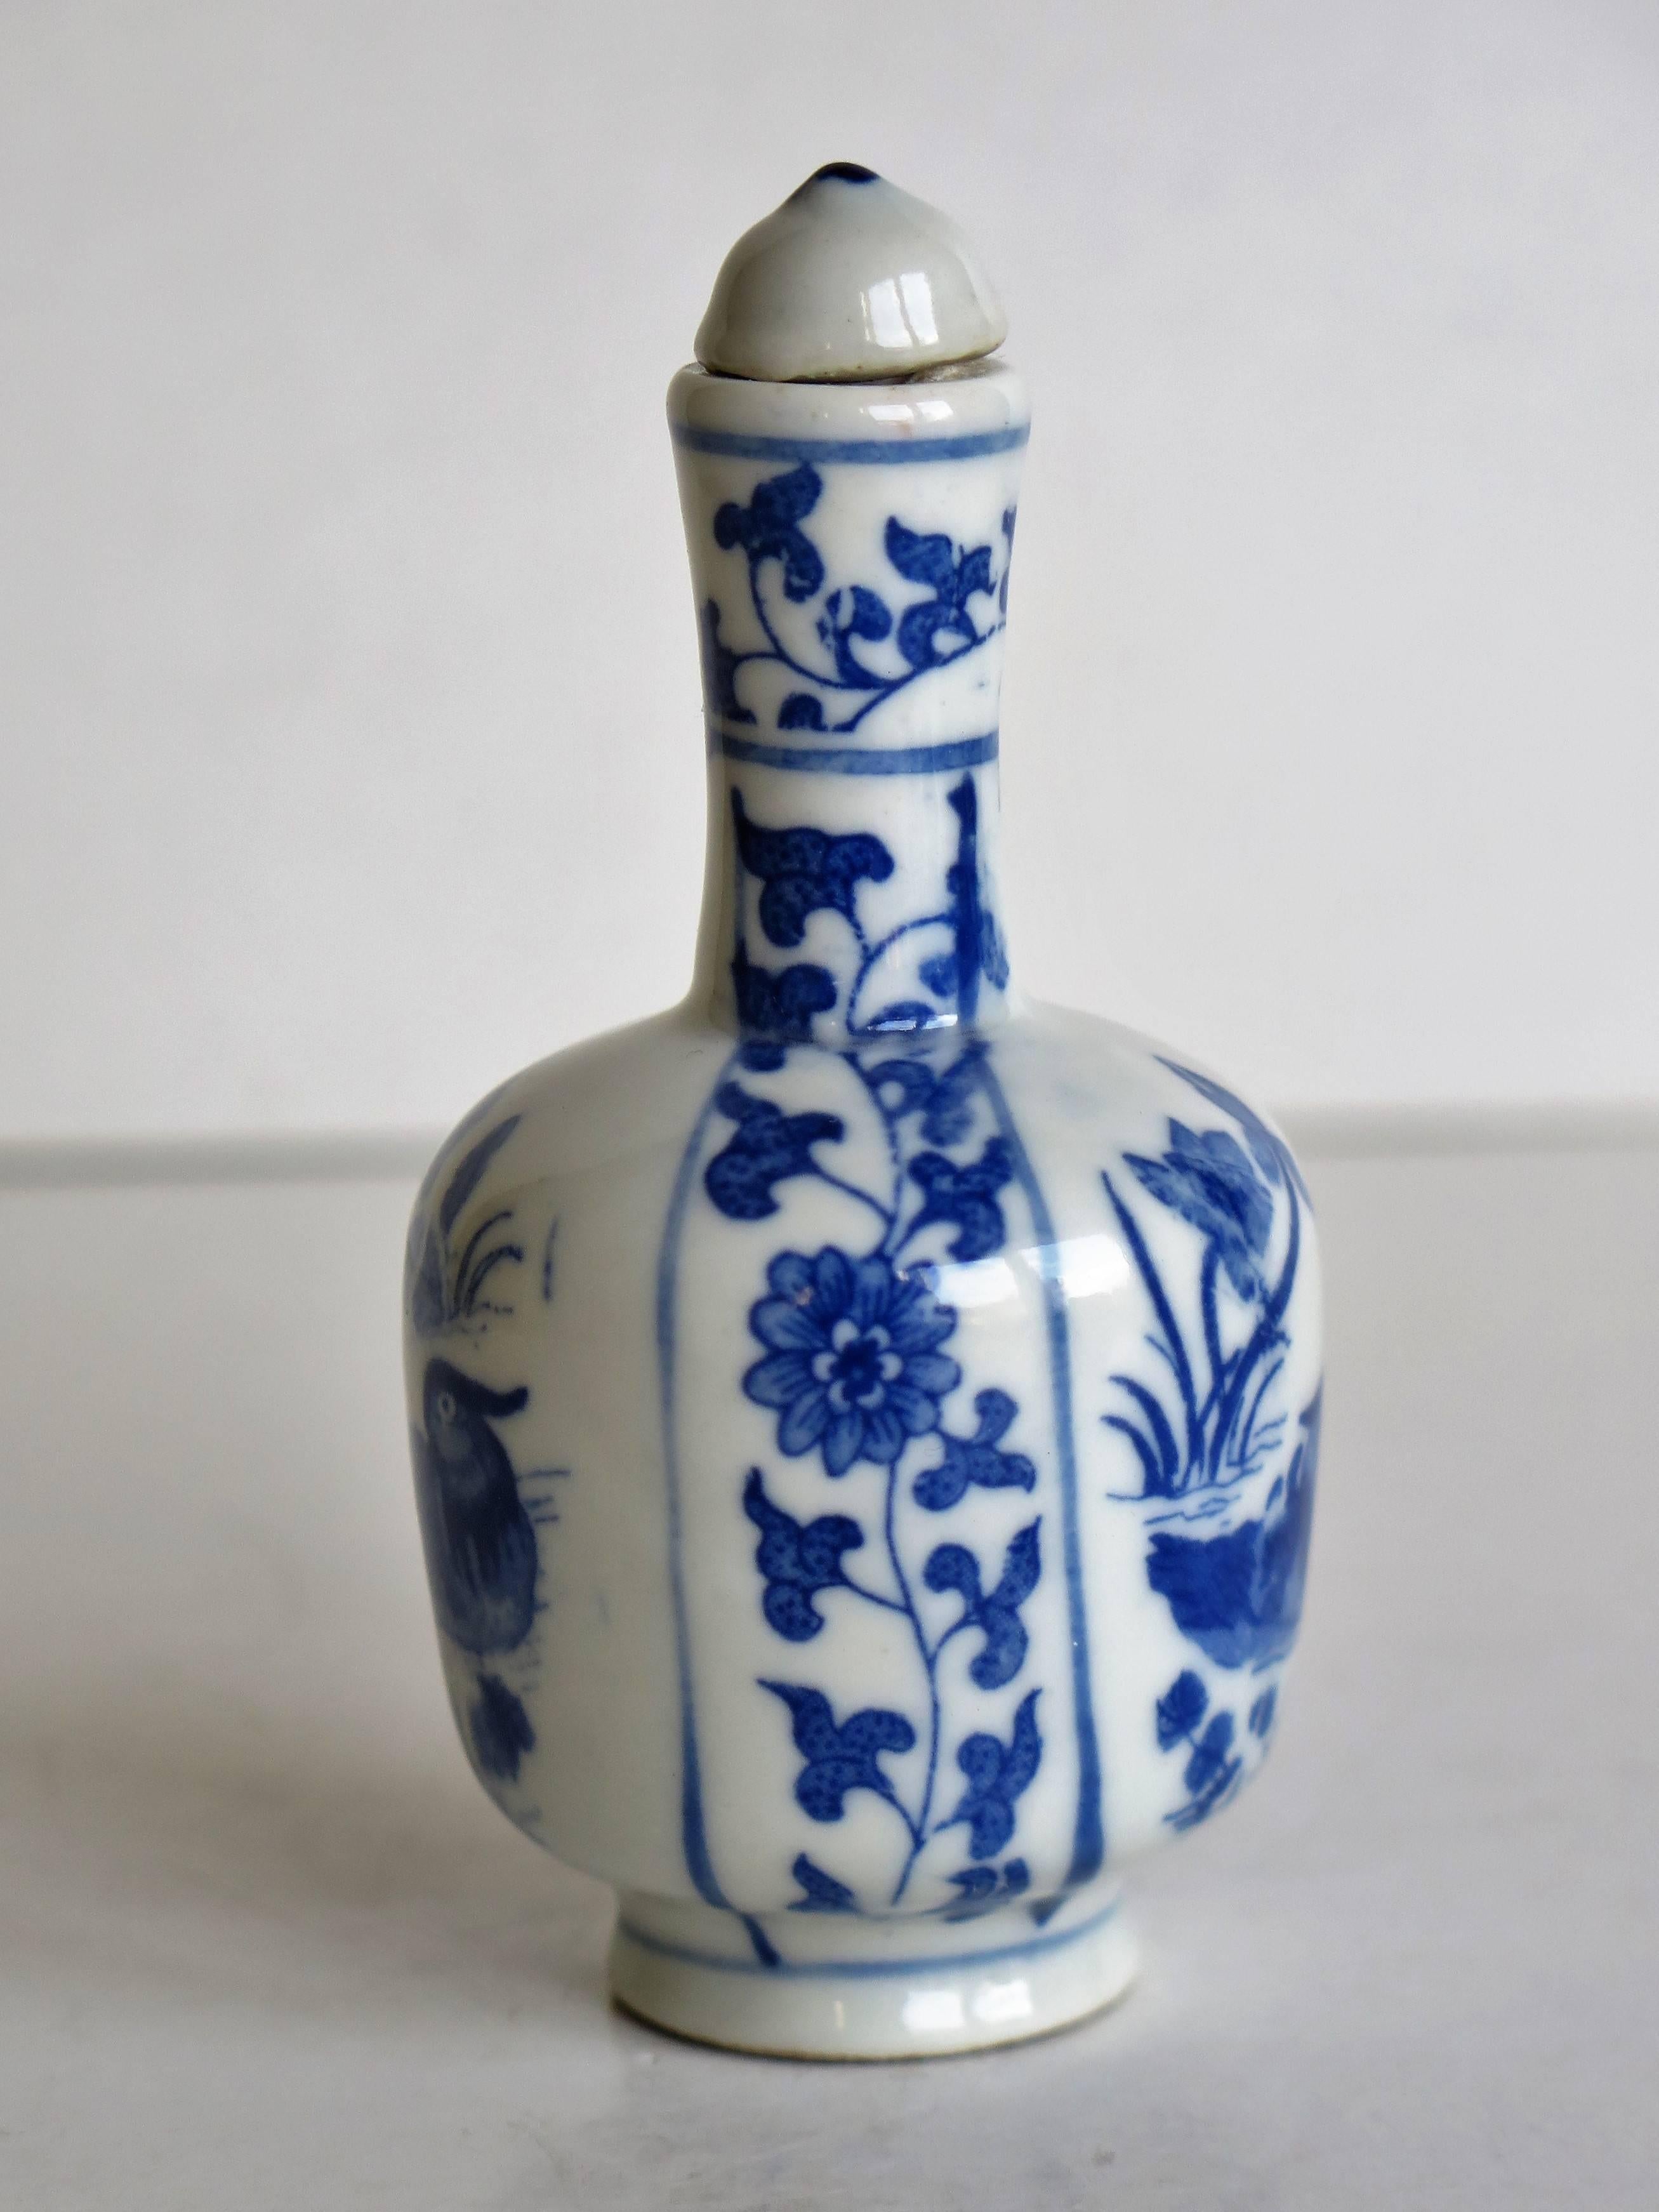 This is a good quality Chinese snuff bottle, made from porcelain, circa 1930.

The cylindrical snuff bottle is bottle shaped on a low foot and narrow neck. The main decoration depicts a well painted design with a pair of mandarin ducks in a